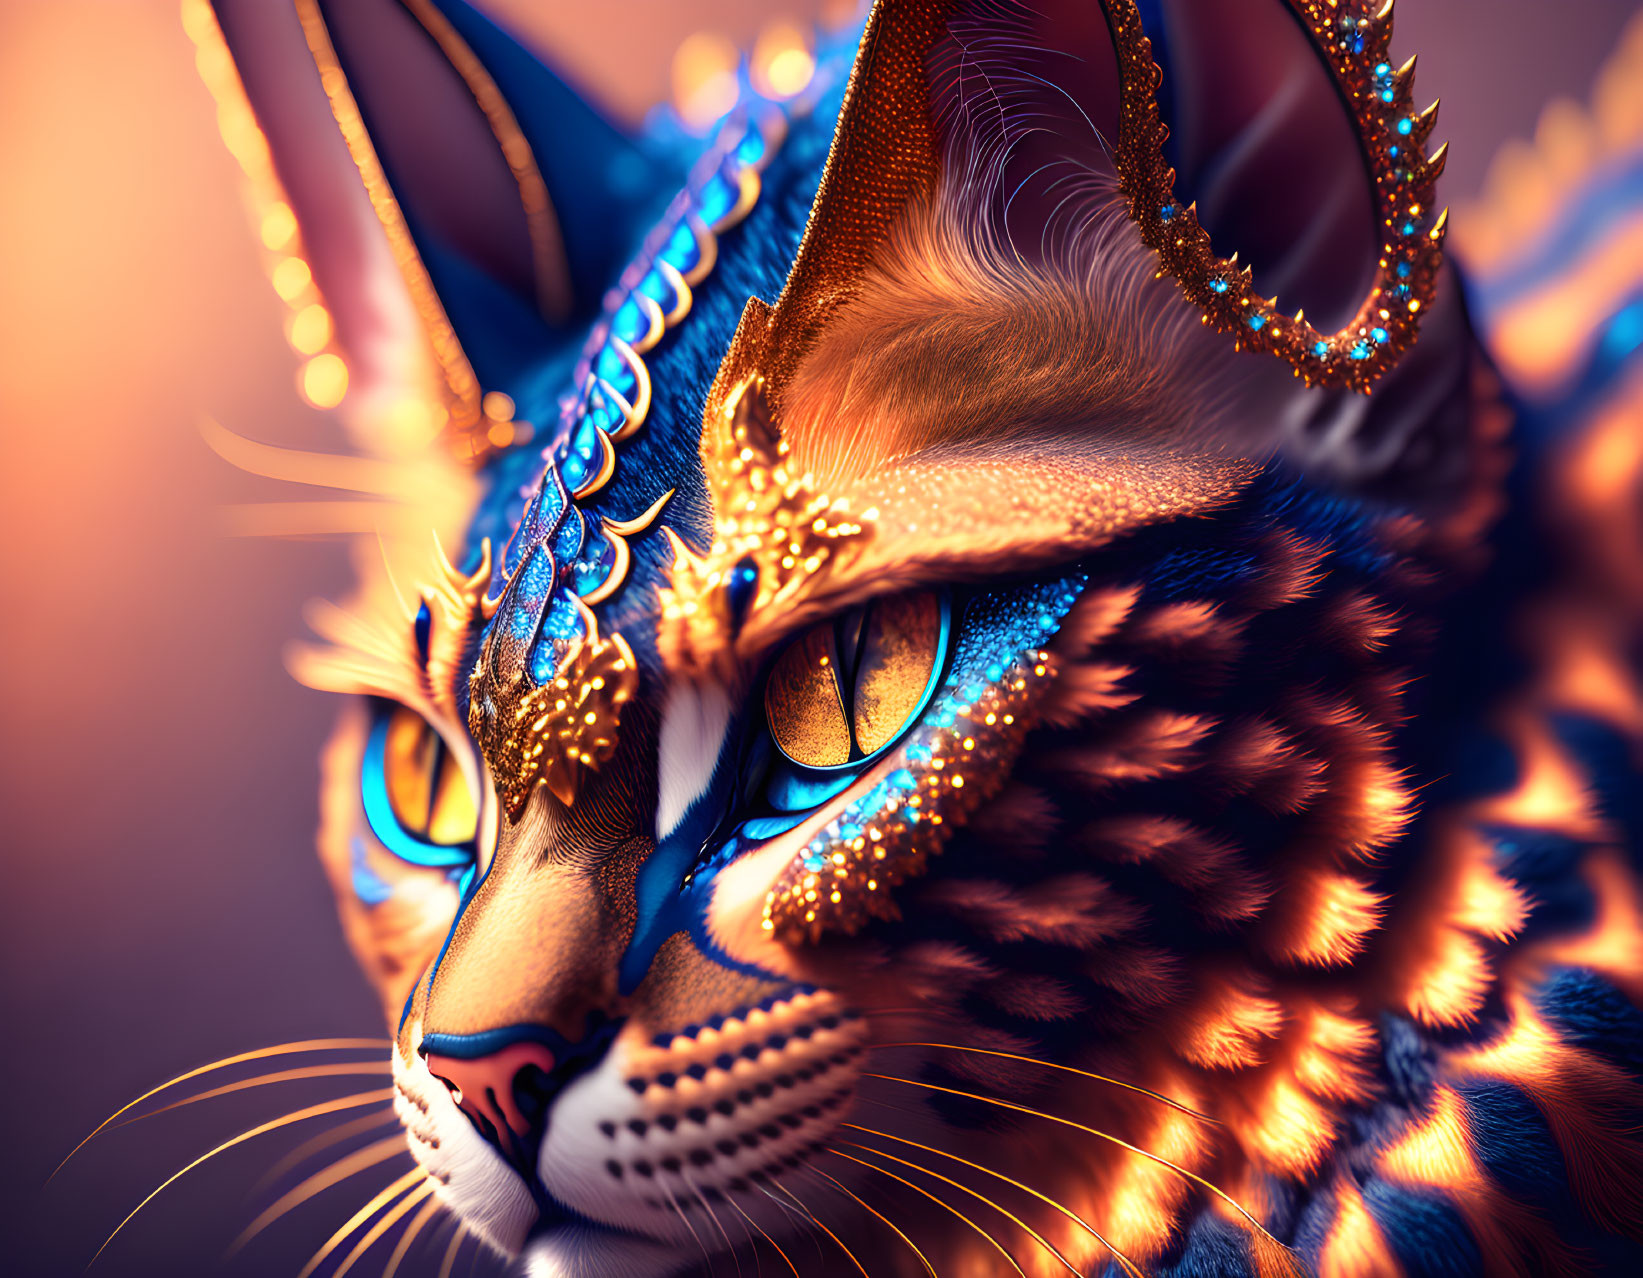 Colorful digital artwork: stylized cat with golden adornments, orange and blue fur